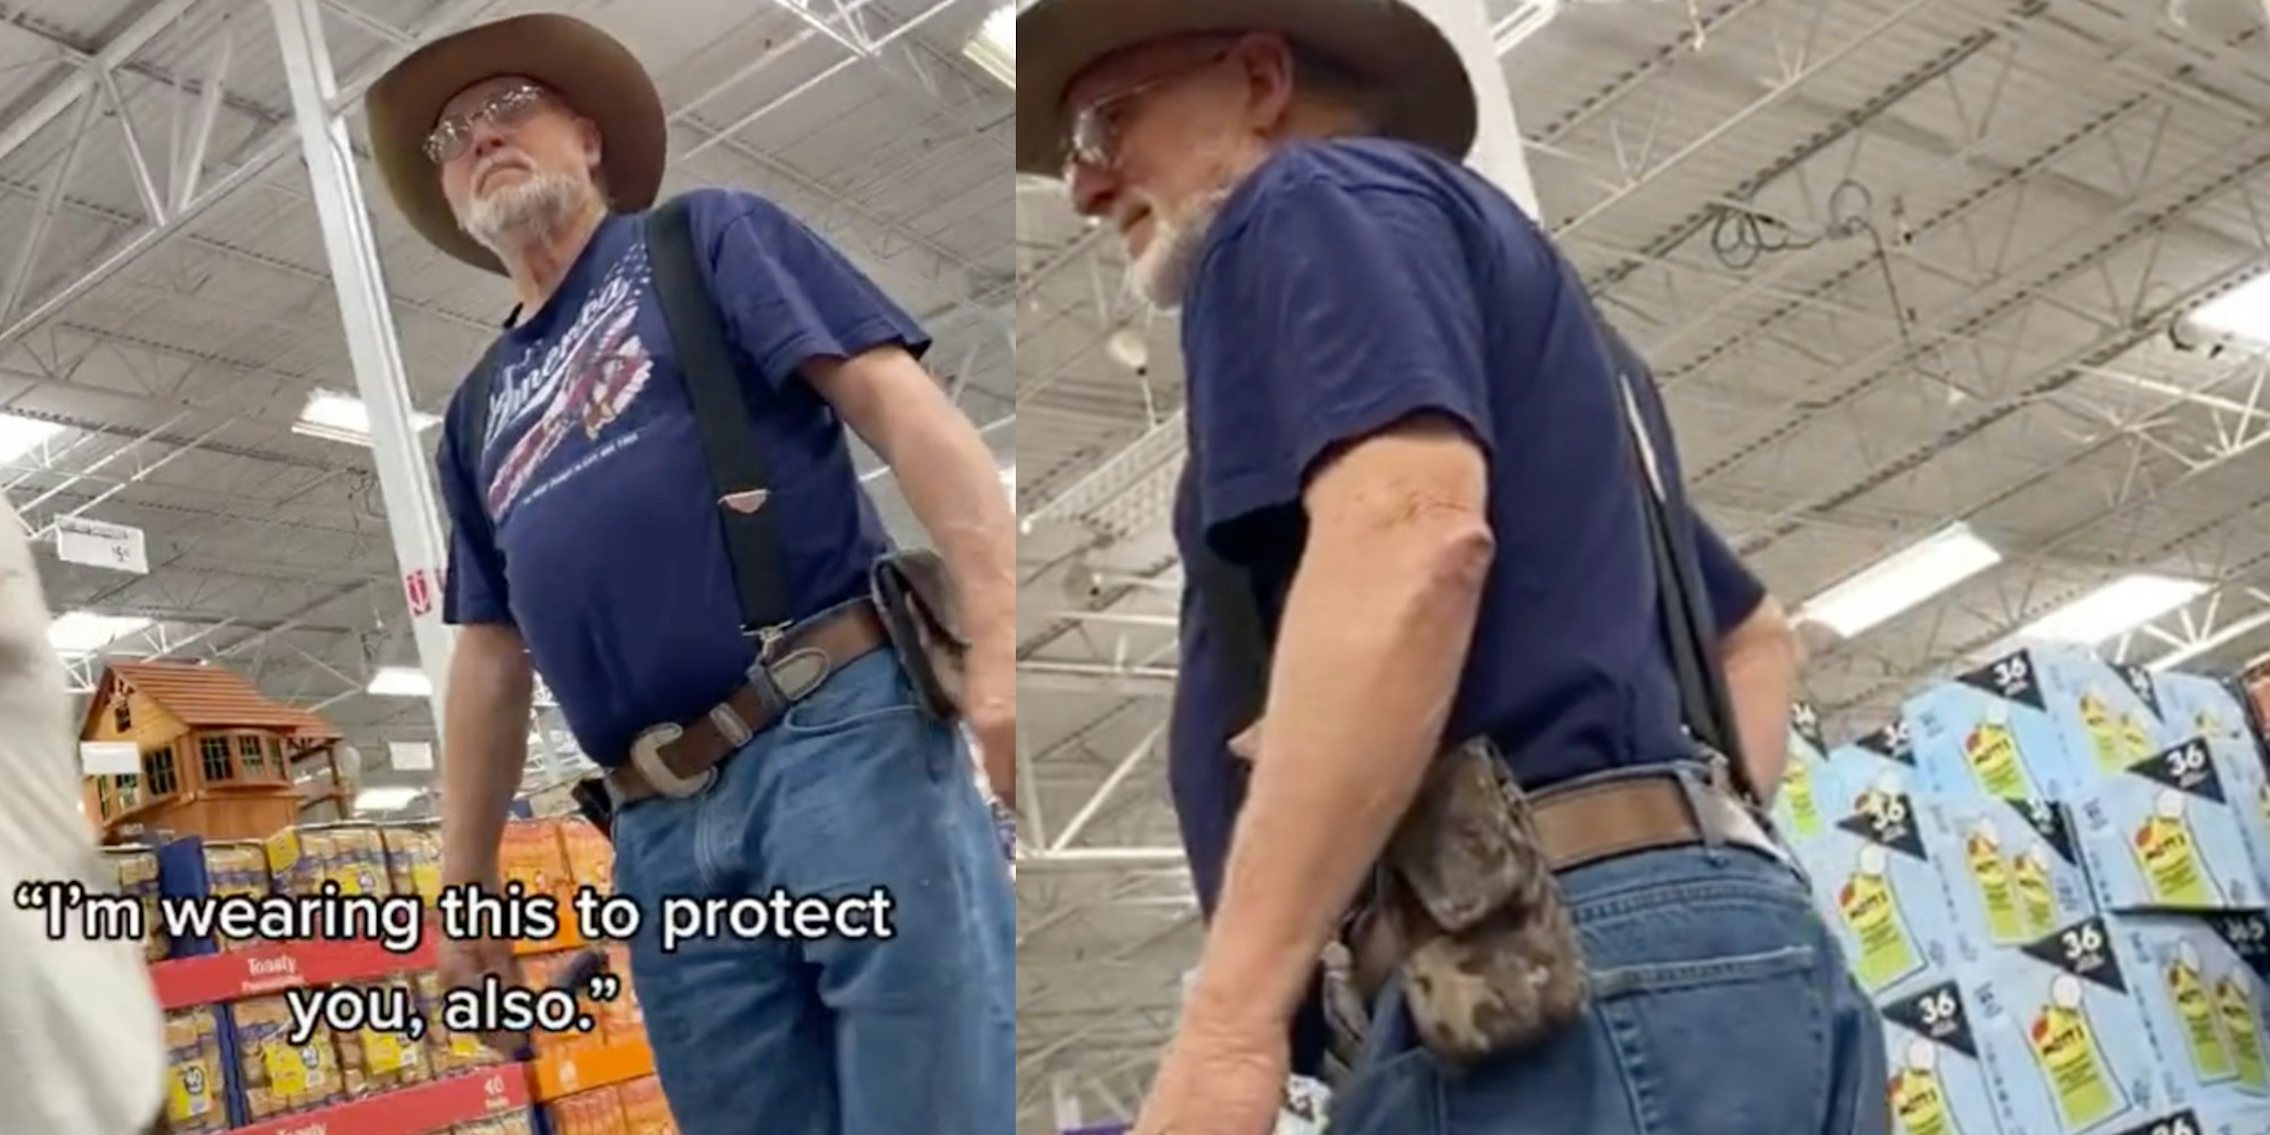 Man carrying a gun not wearing a mask confronted in supermarket